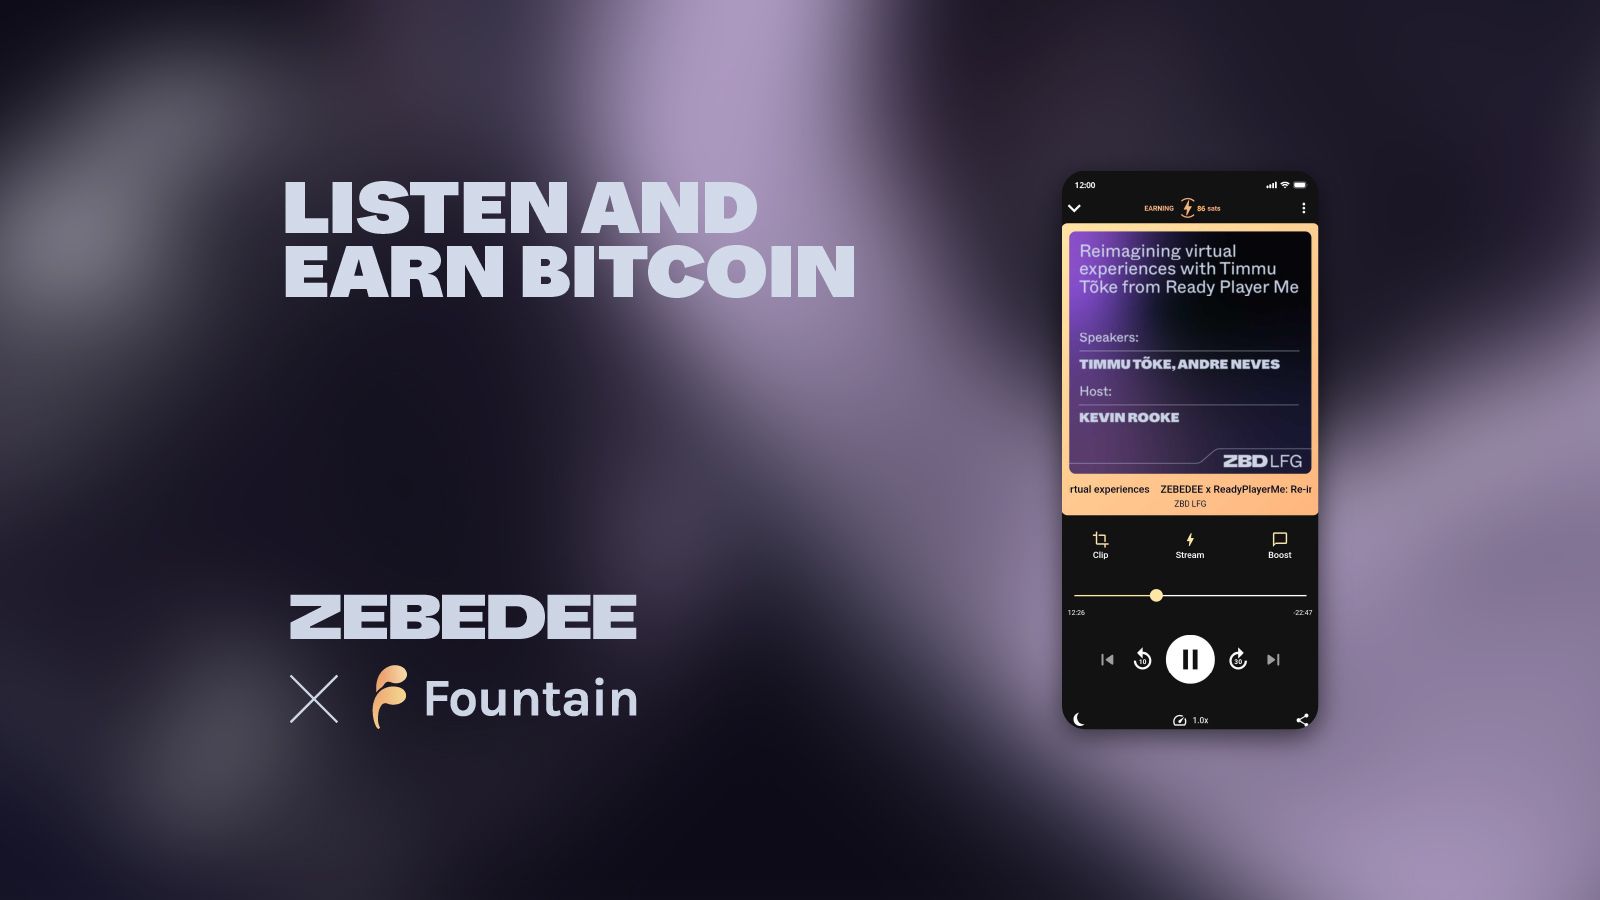 Listen and earn on Fountain with ZEBEDEE.